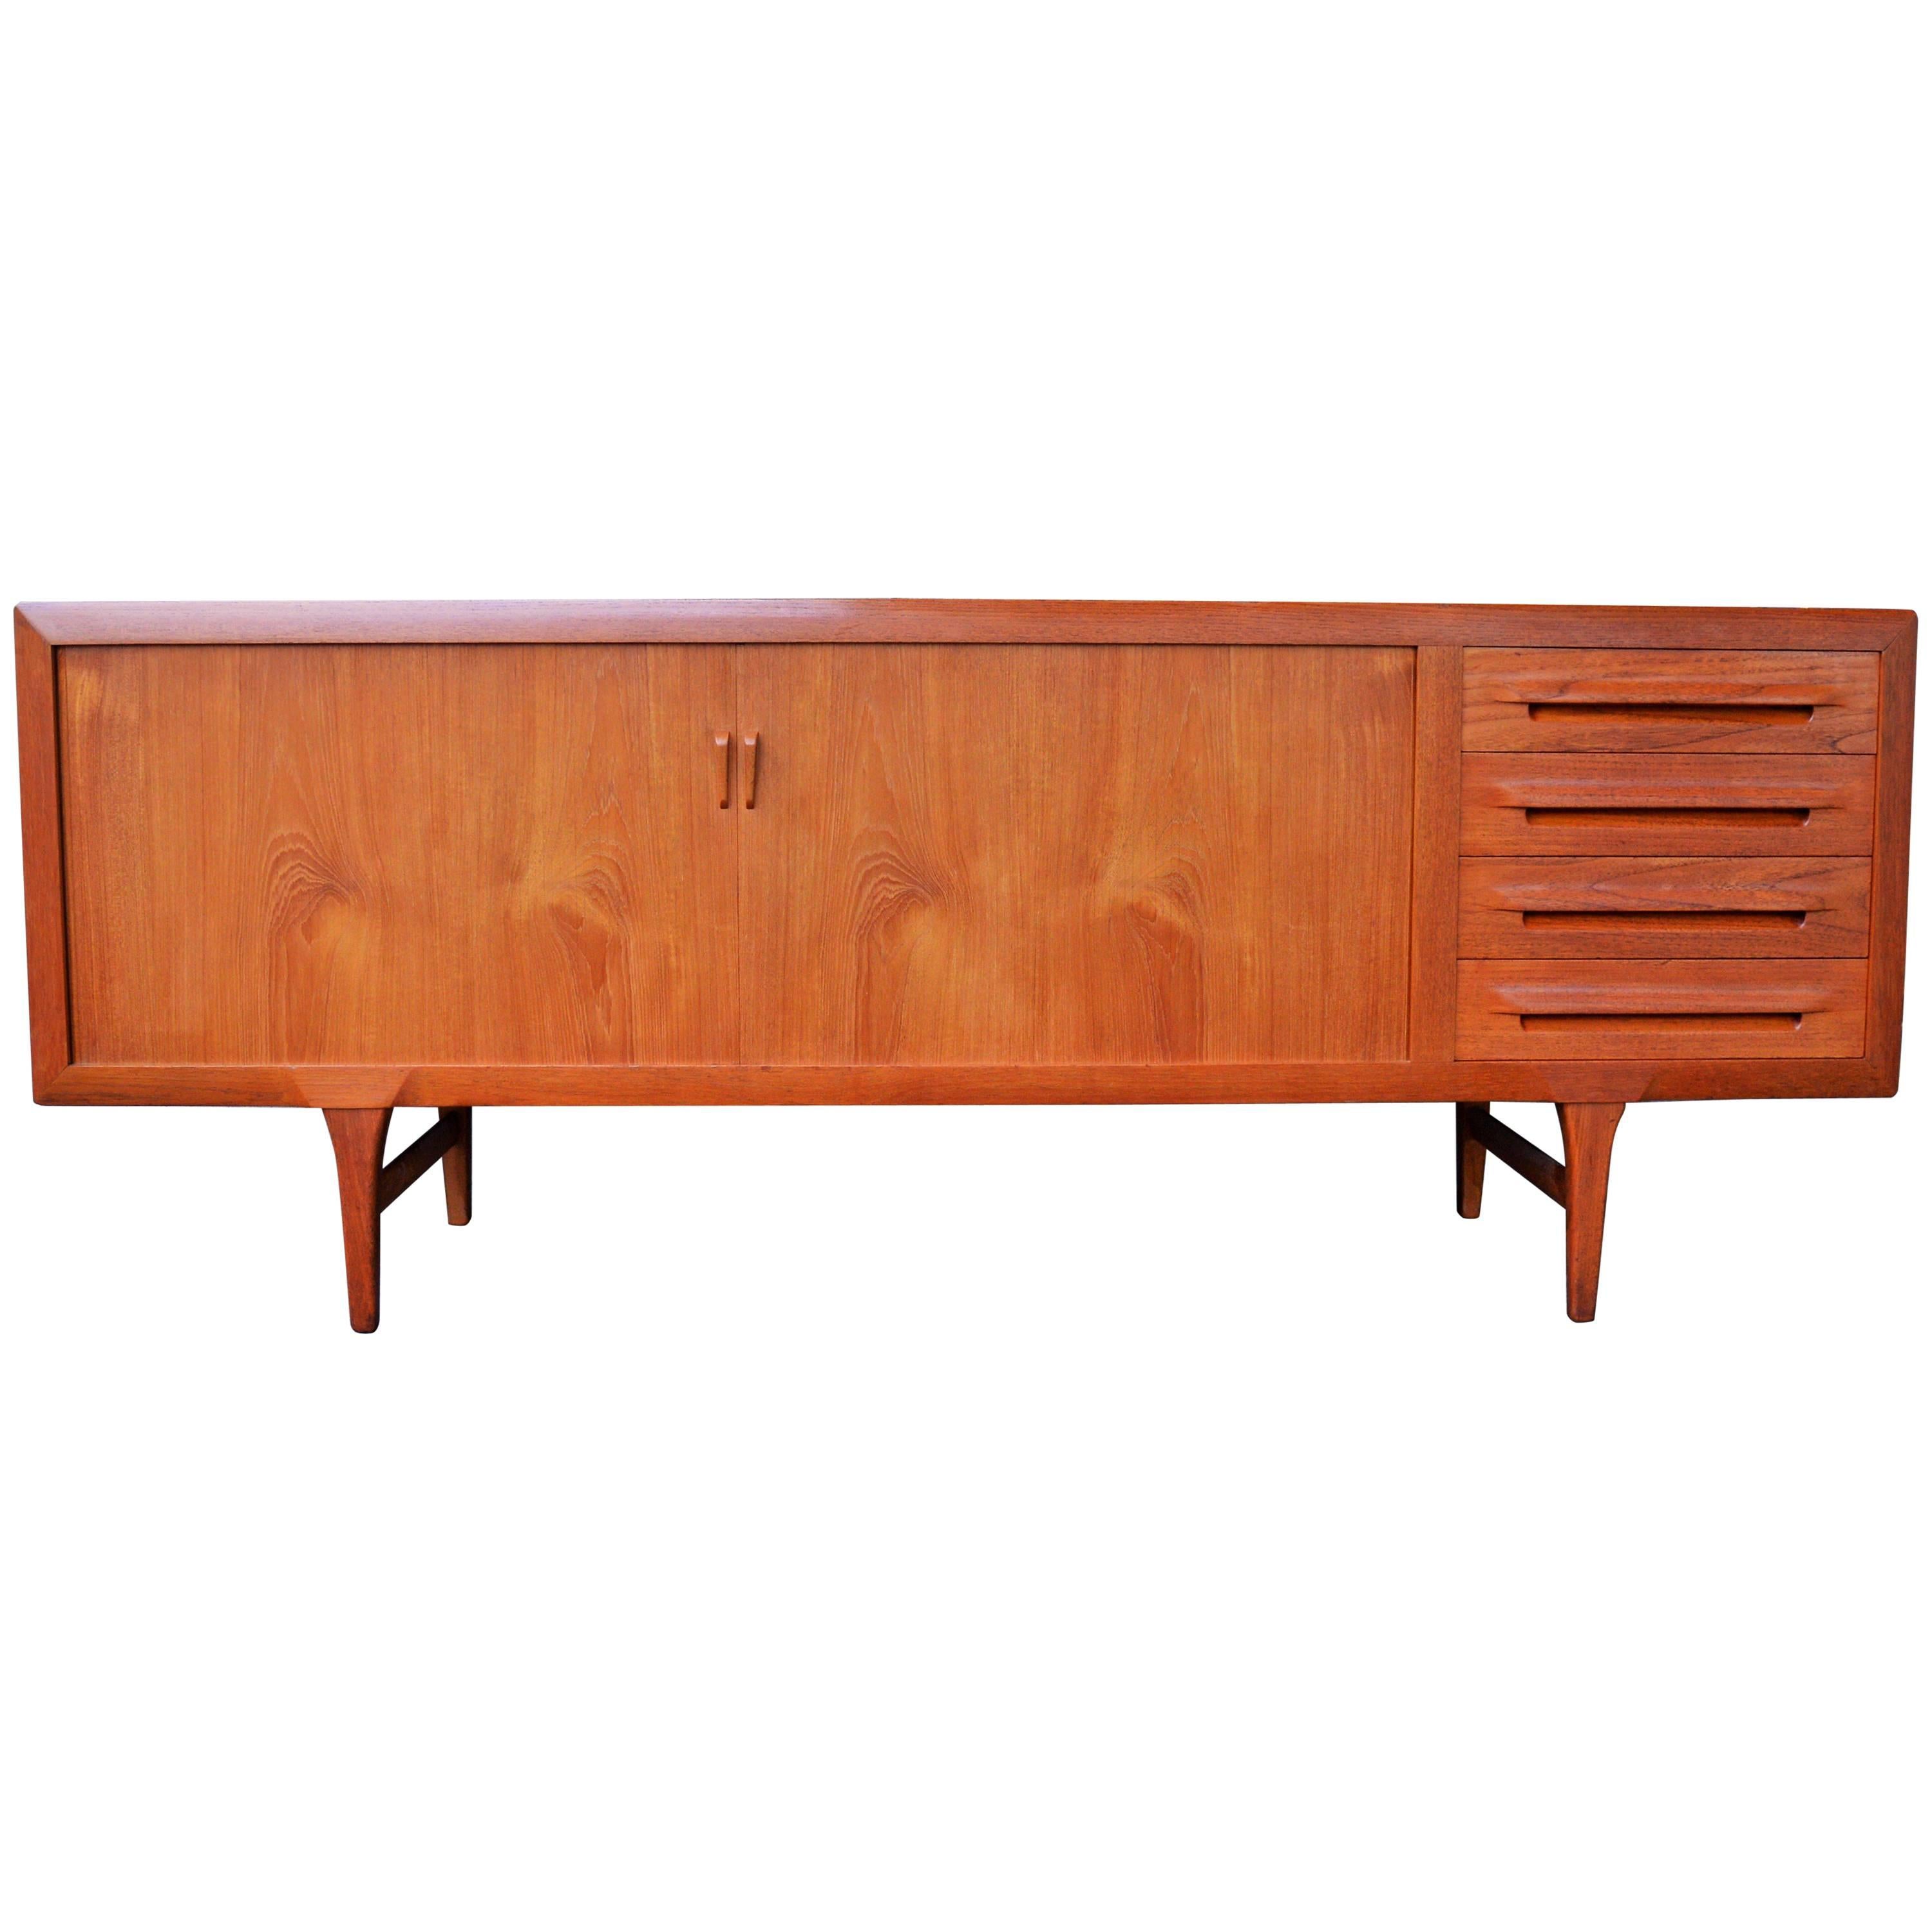 1950s Danish Teak Tambour Credenza by Ib Kofod-Larsen with Finished Back